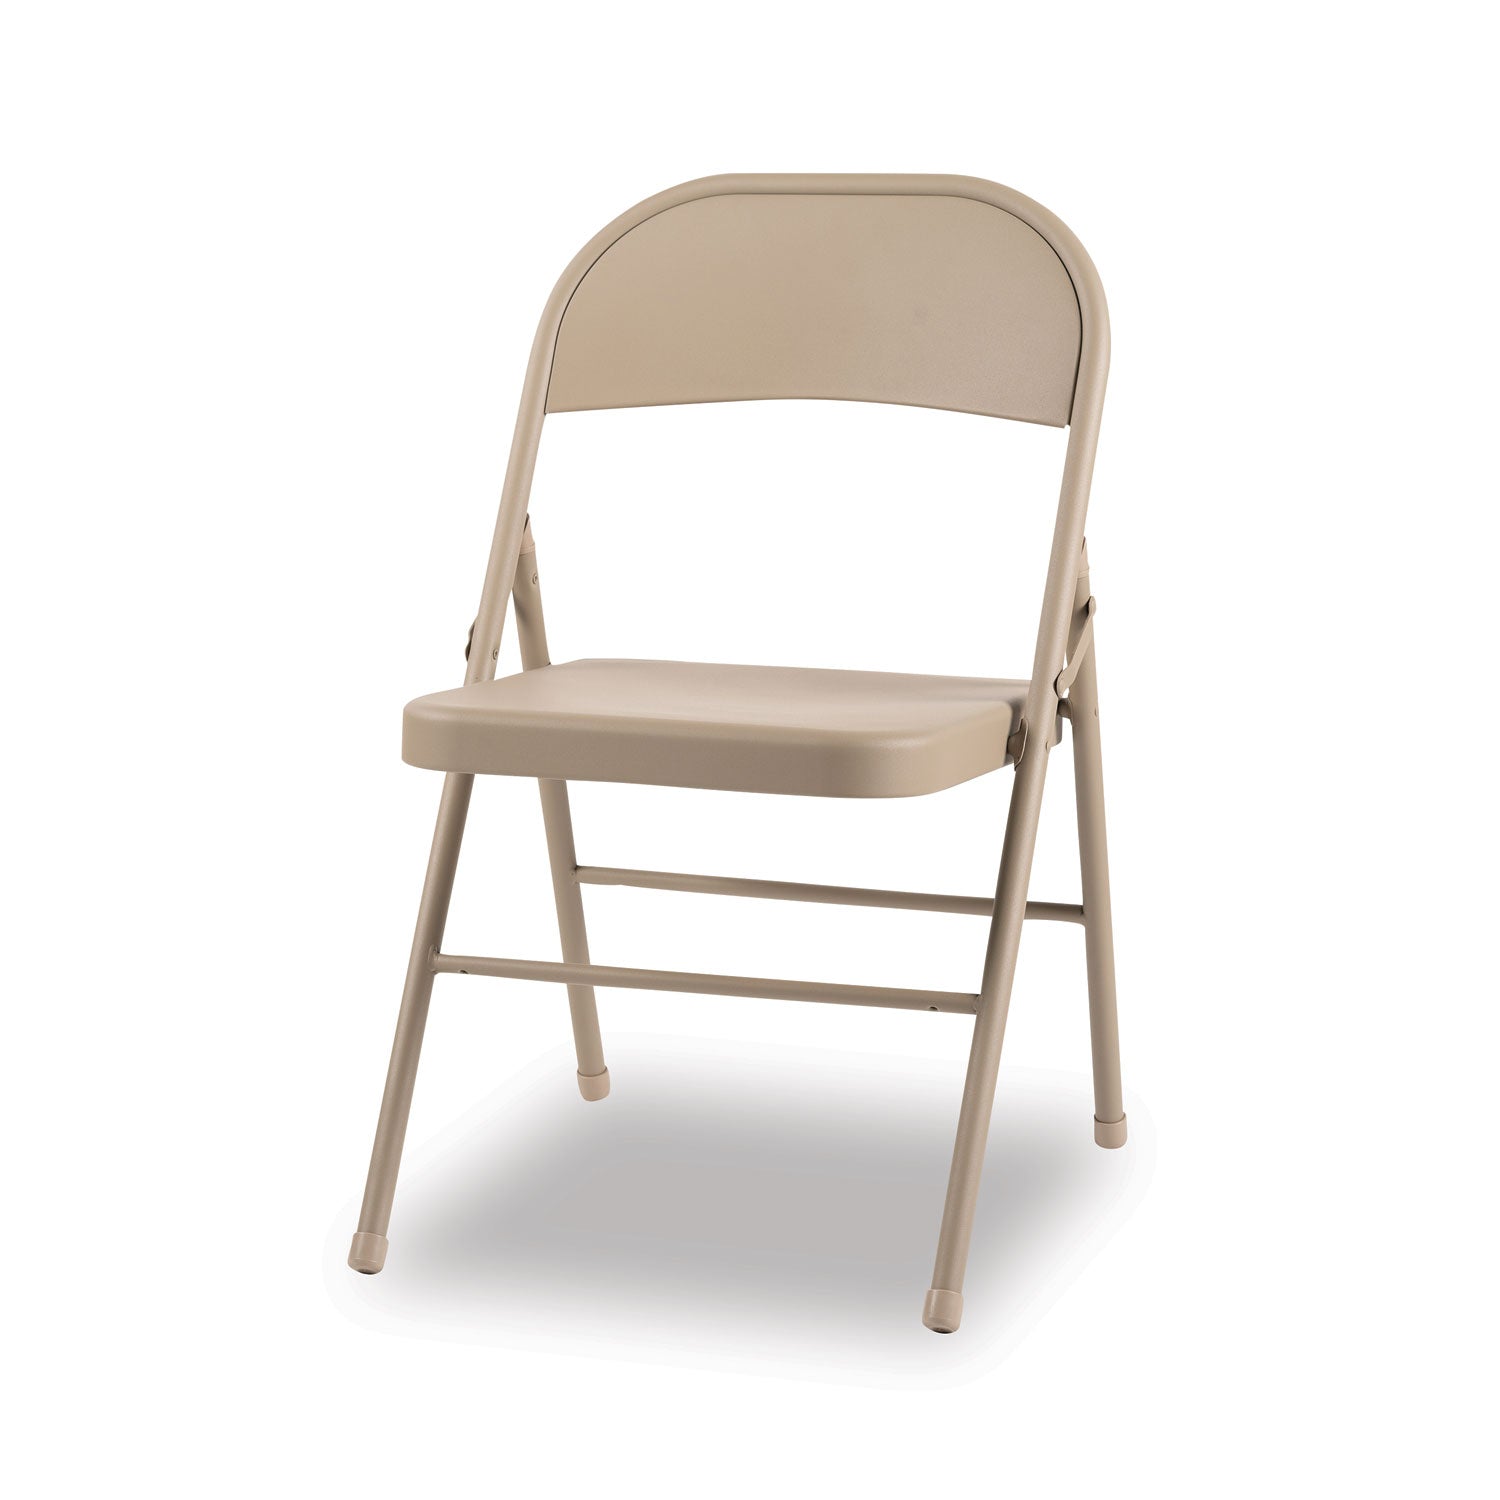 all-steel-folding-chair-supports-up-to-300-lb-165-seat-height-tan-seat-tan-back-tan-base-4-carton_alefcmt4t - 2